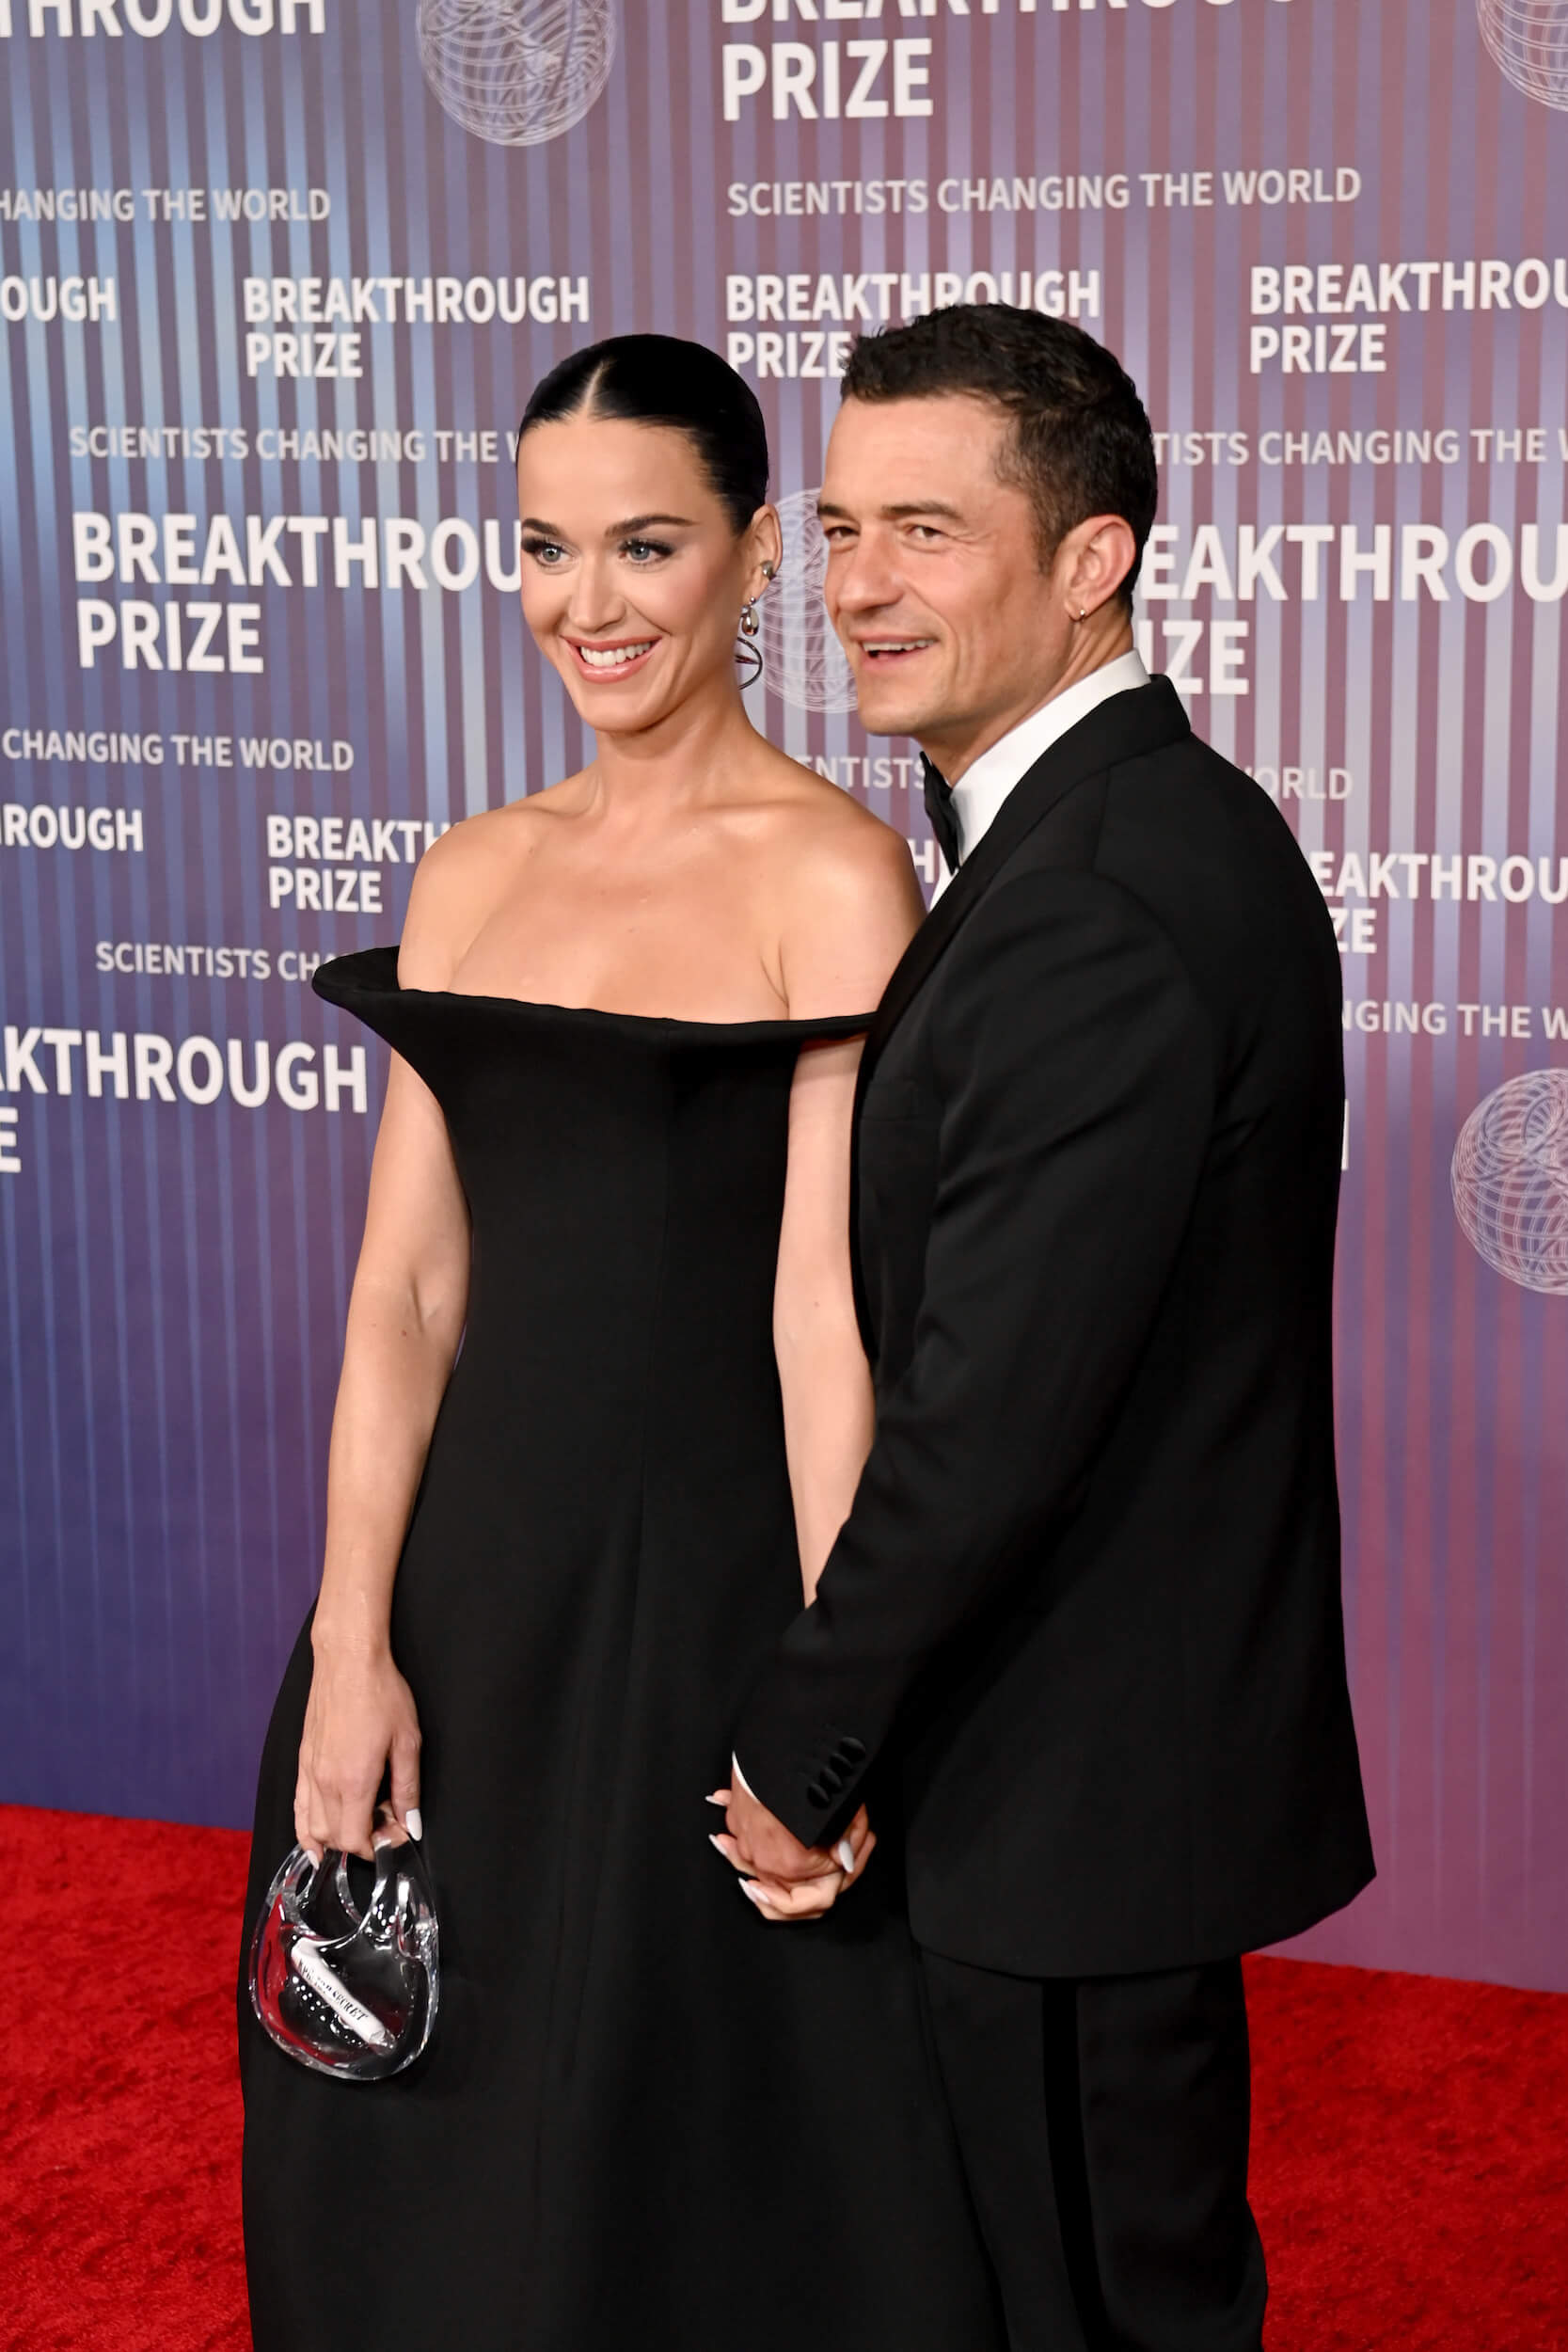 Katy Perry and Orlando Bloom standing on the red carpet while attending the 10th Annual Breakthrough Prize Awards. Perry is dressed in a black dress and Bloom is dressed in a tuxedo.